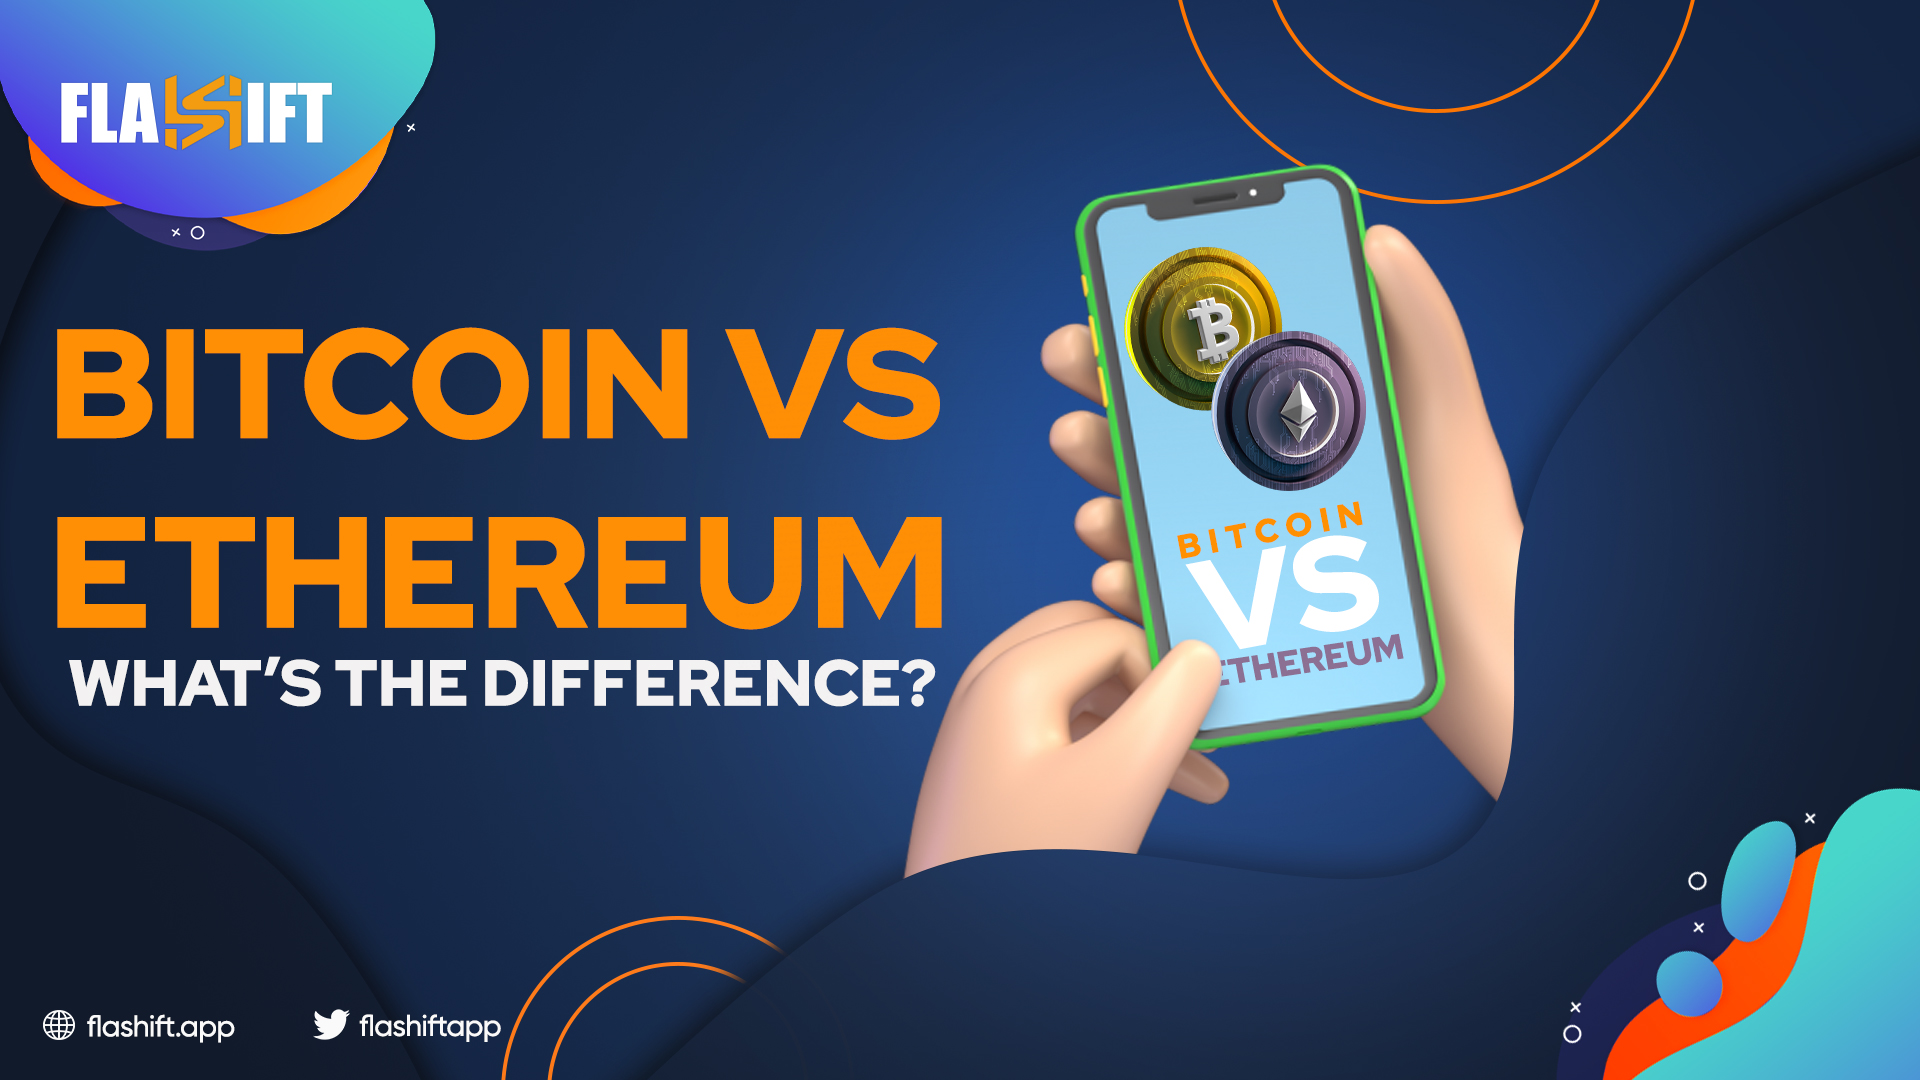 Bitcoin vs Ethereum; which one is better?